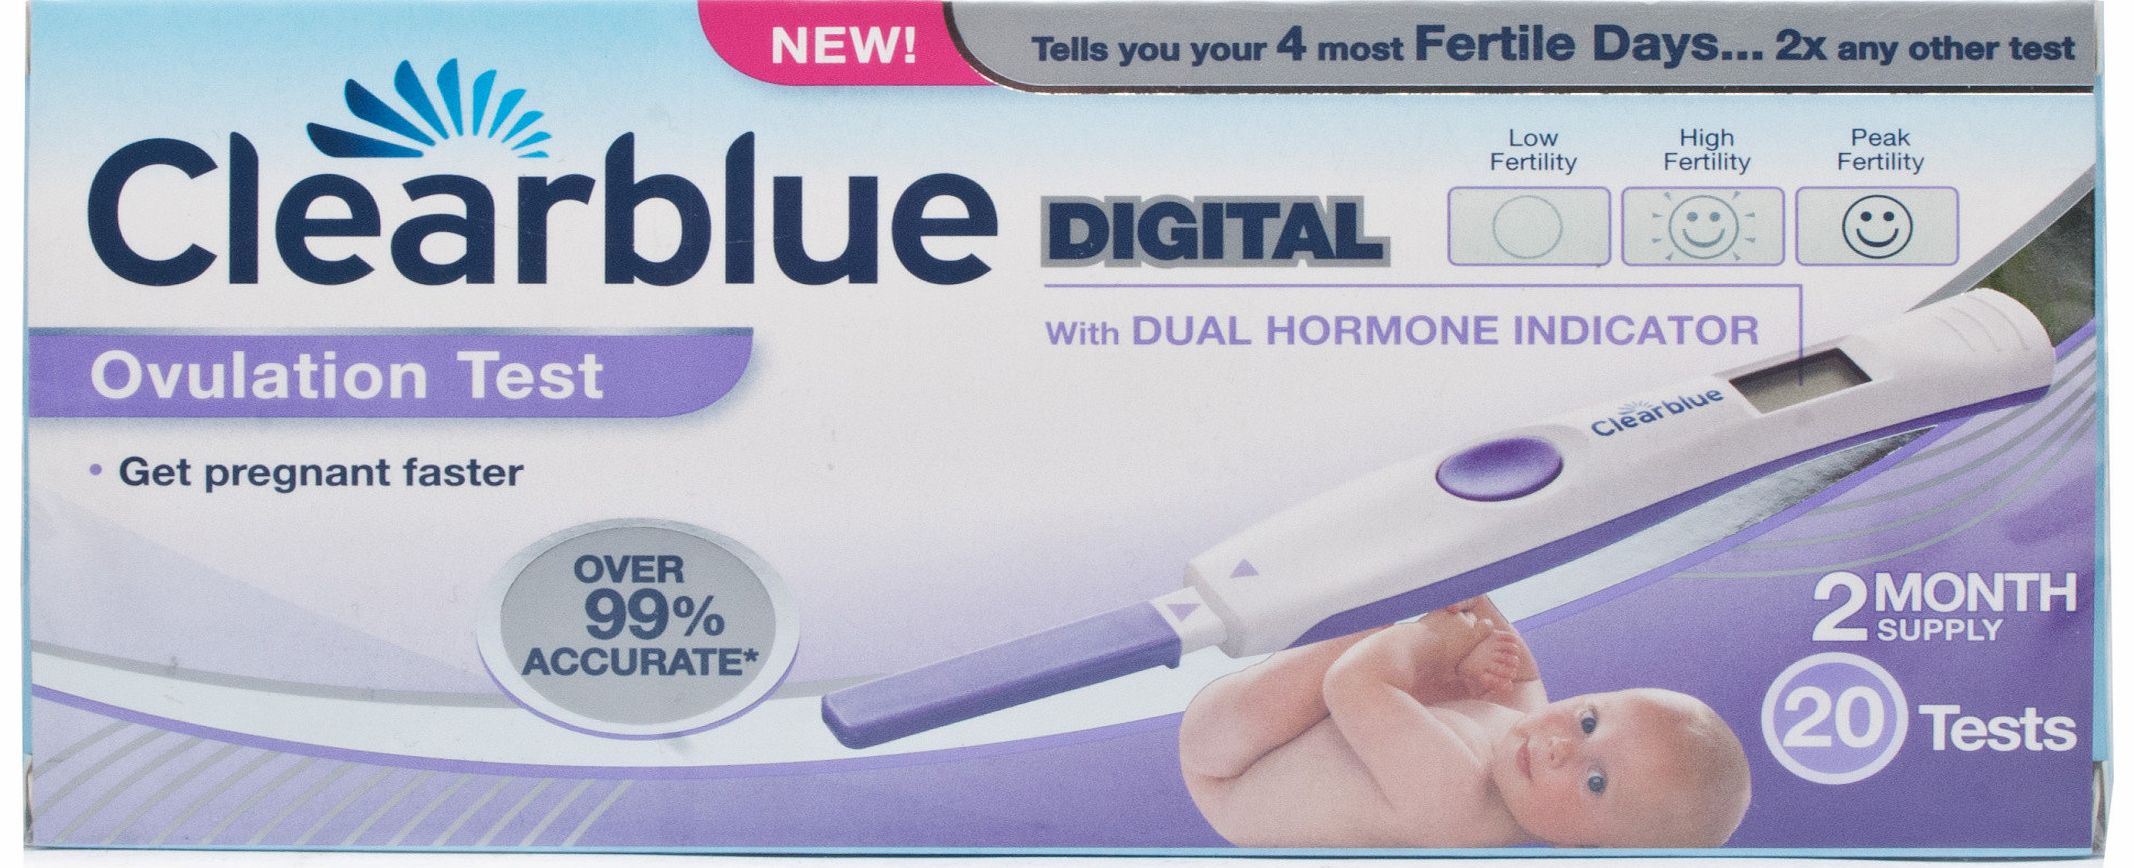 Clearblue Digital Home Ovulation Test